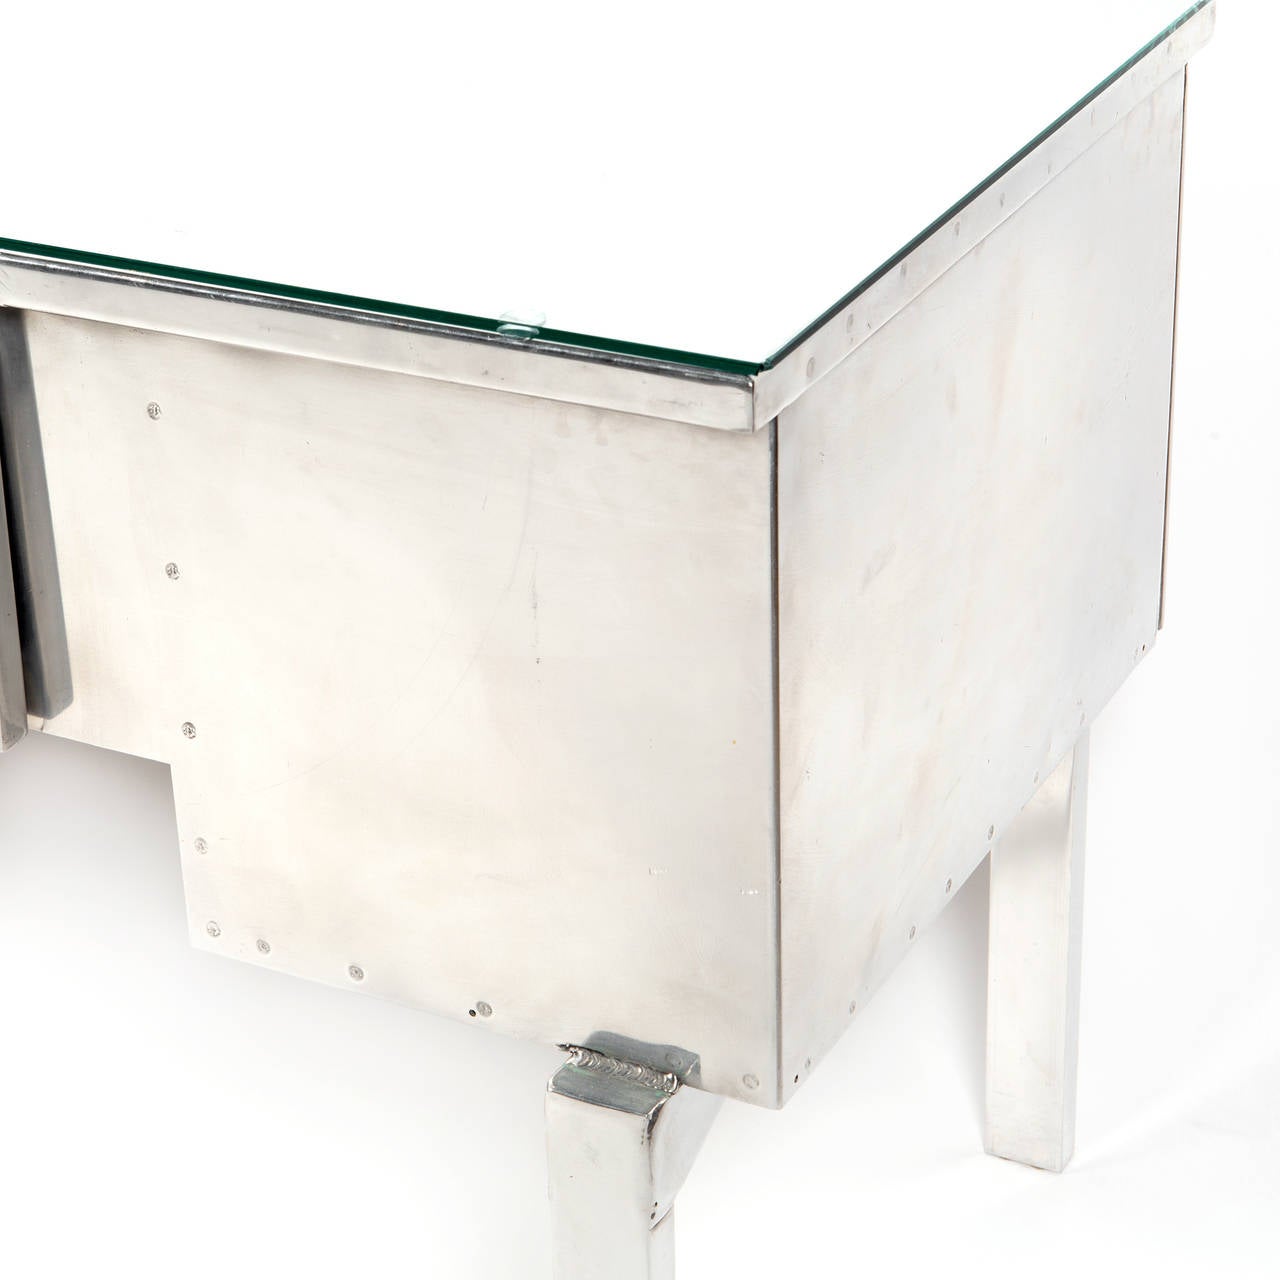 Desk made from aircraft aluminum during 1930's-40's and would have been used in European and Pacific theatres during the war. Interior drawers have green paint that used to cover the entire desk. Desk has been stripped to reveal original aluminum